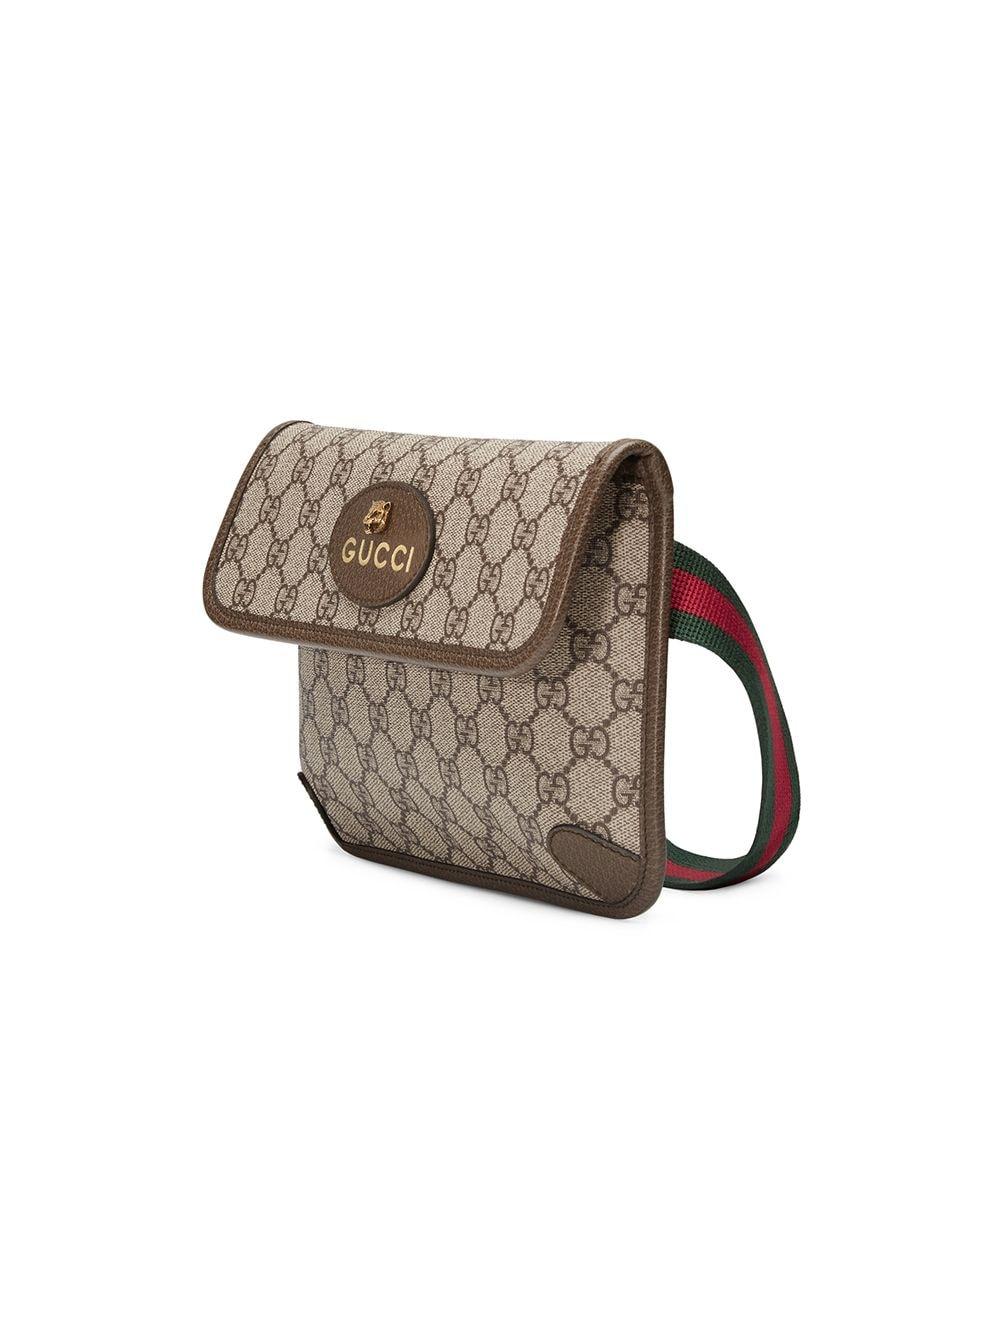 Gucci Leather GG Supreme Belt Bag in Brown - Lyst